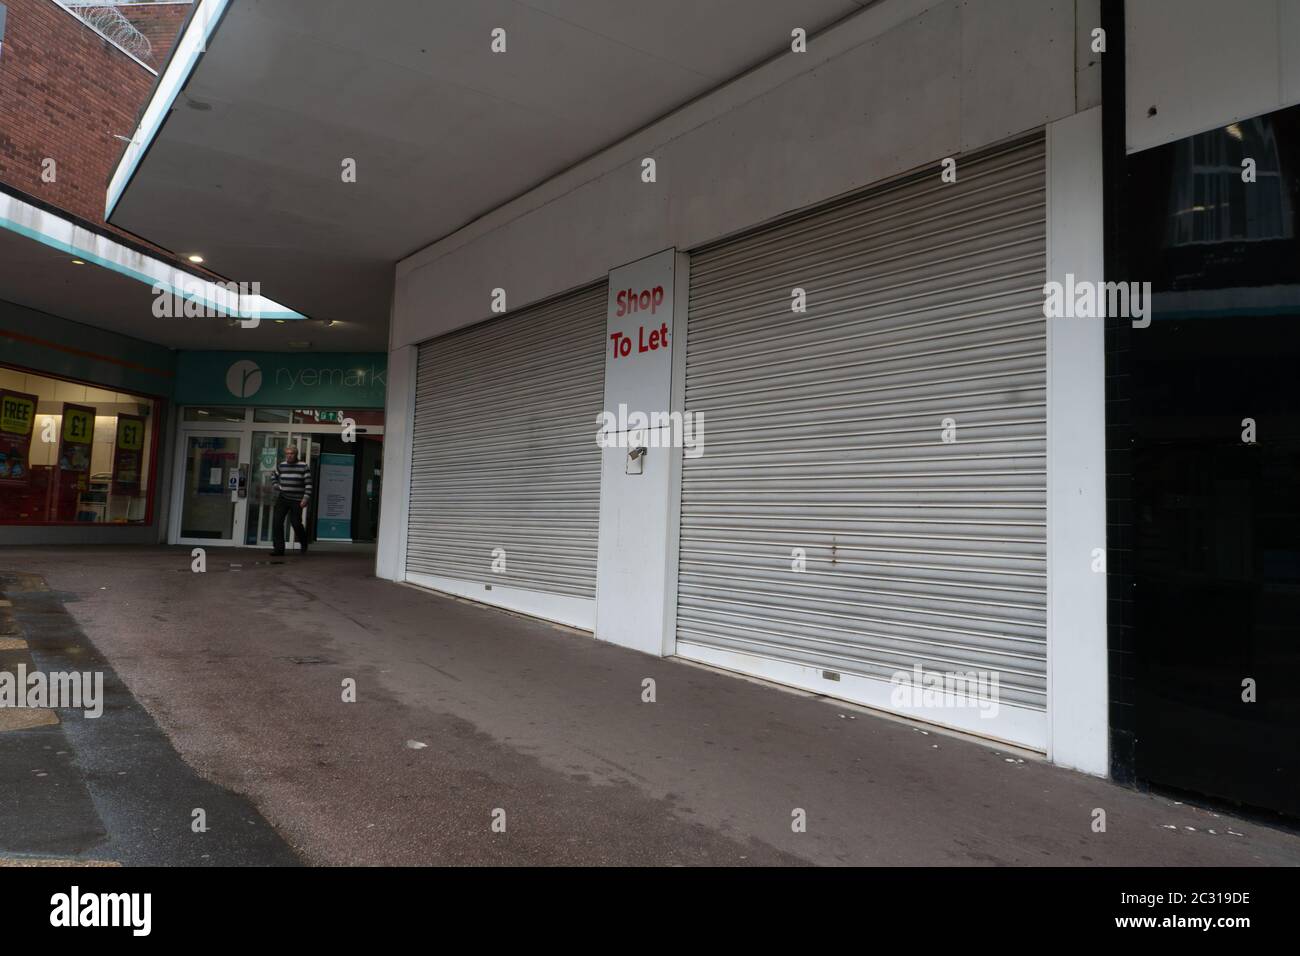 Shuttered up shops and To let sign. June 18th 2020. Covid 19 Pandemic. Stourbridge. West Midlands. UK Stock Photo